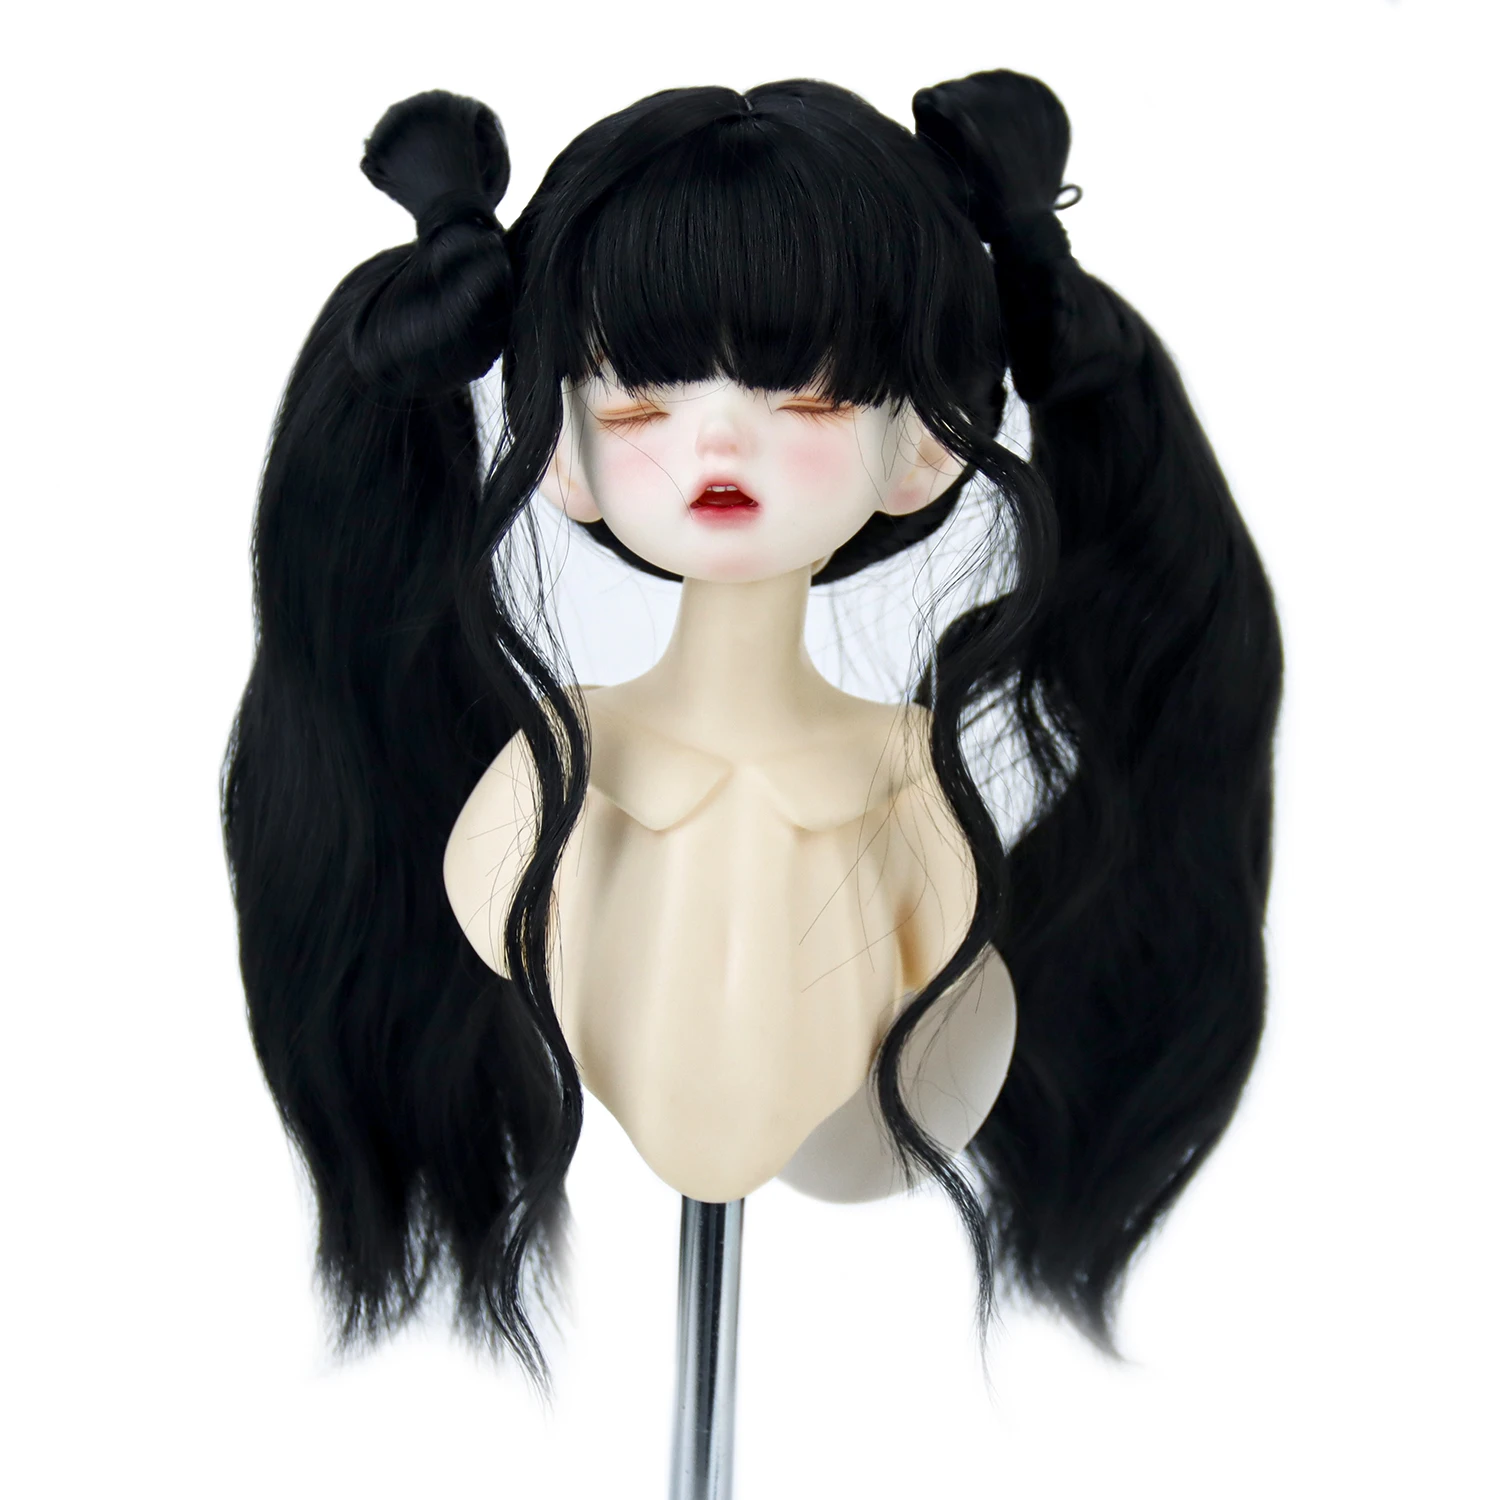 1/6 BJD Wigs Pigtails Black Braid With Bangs Wavy 6-7'' MSD Doll Accessories Heat Resistant Fiber Tress Doll Hair DIY Gifts aidolla doll accessories 1 3 bjd doll wig middle length bangs straight hair blue high temperature fiber wig for diy bjd doll